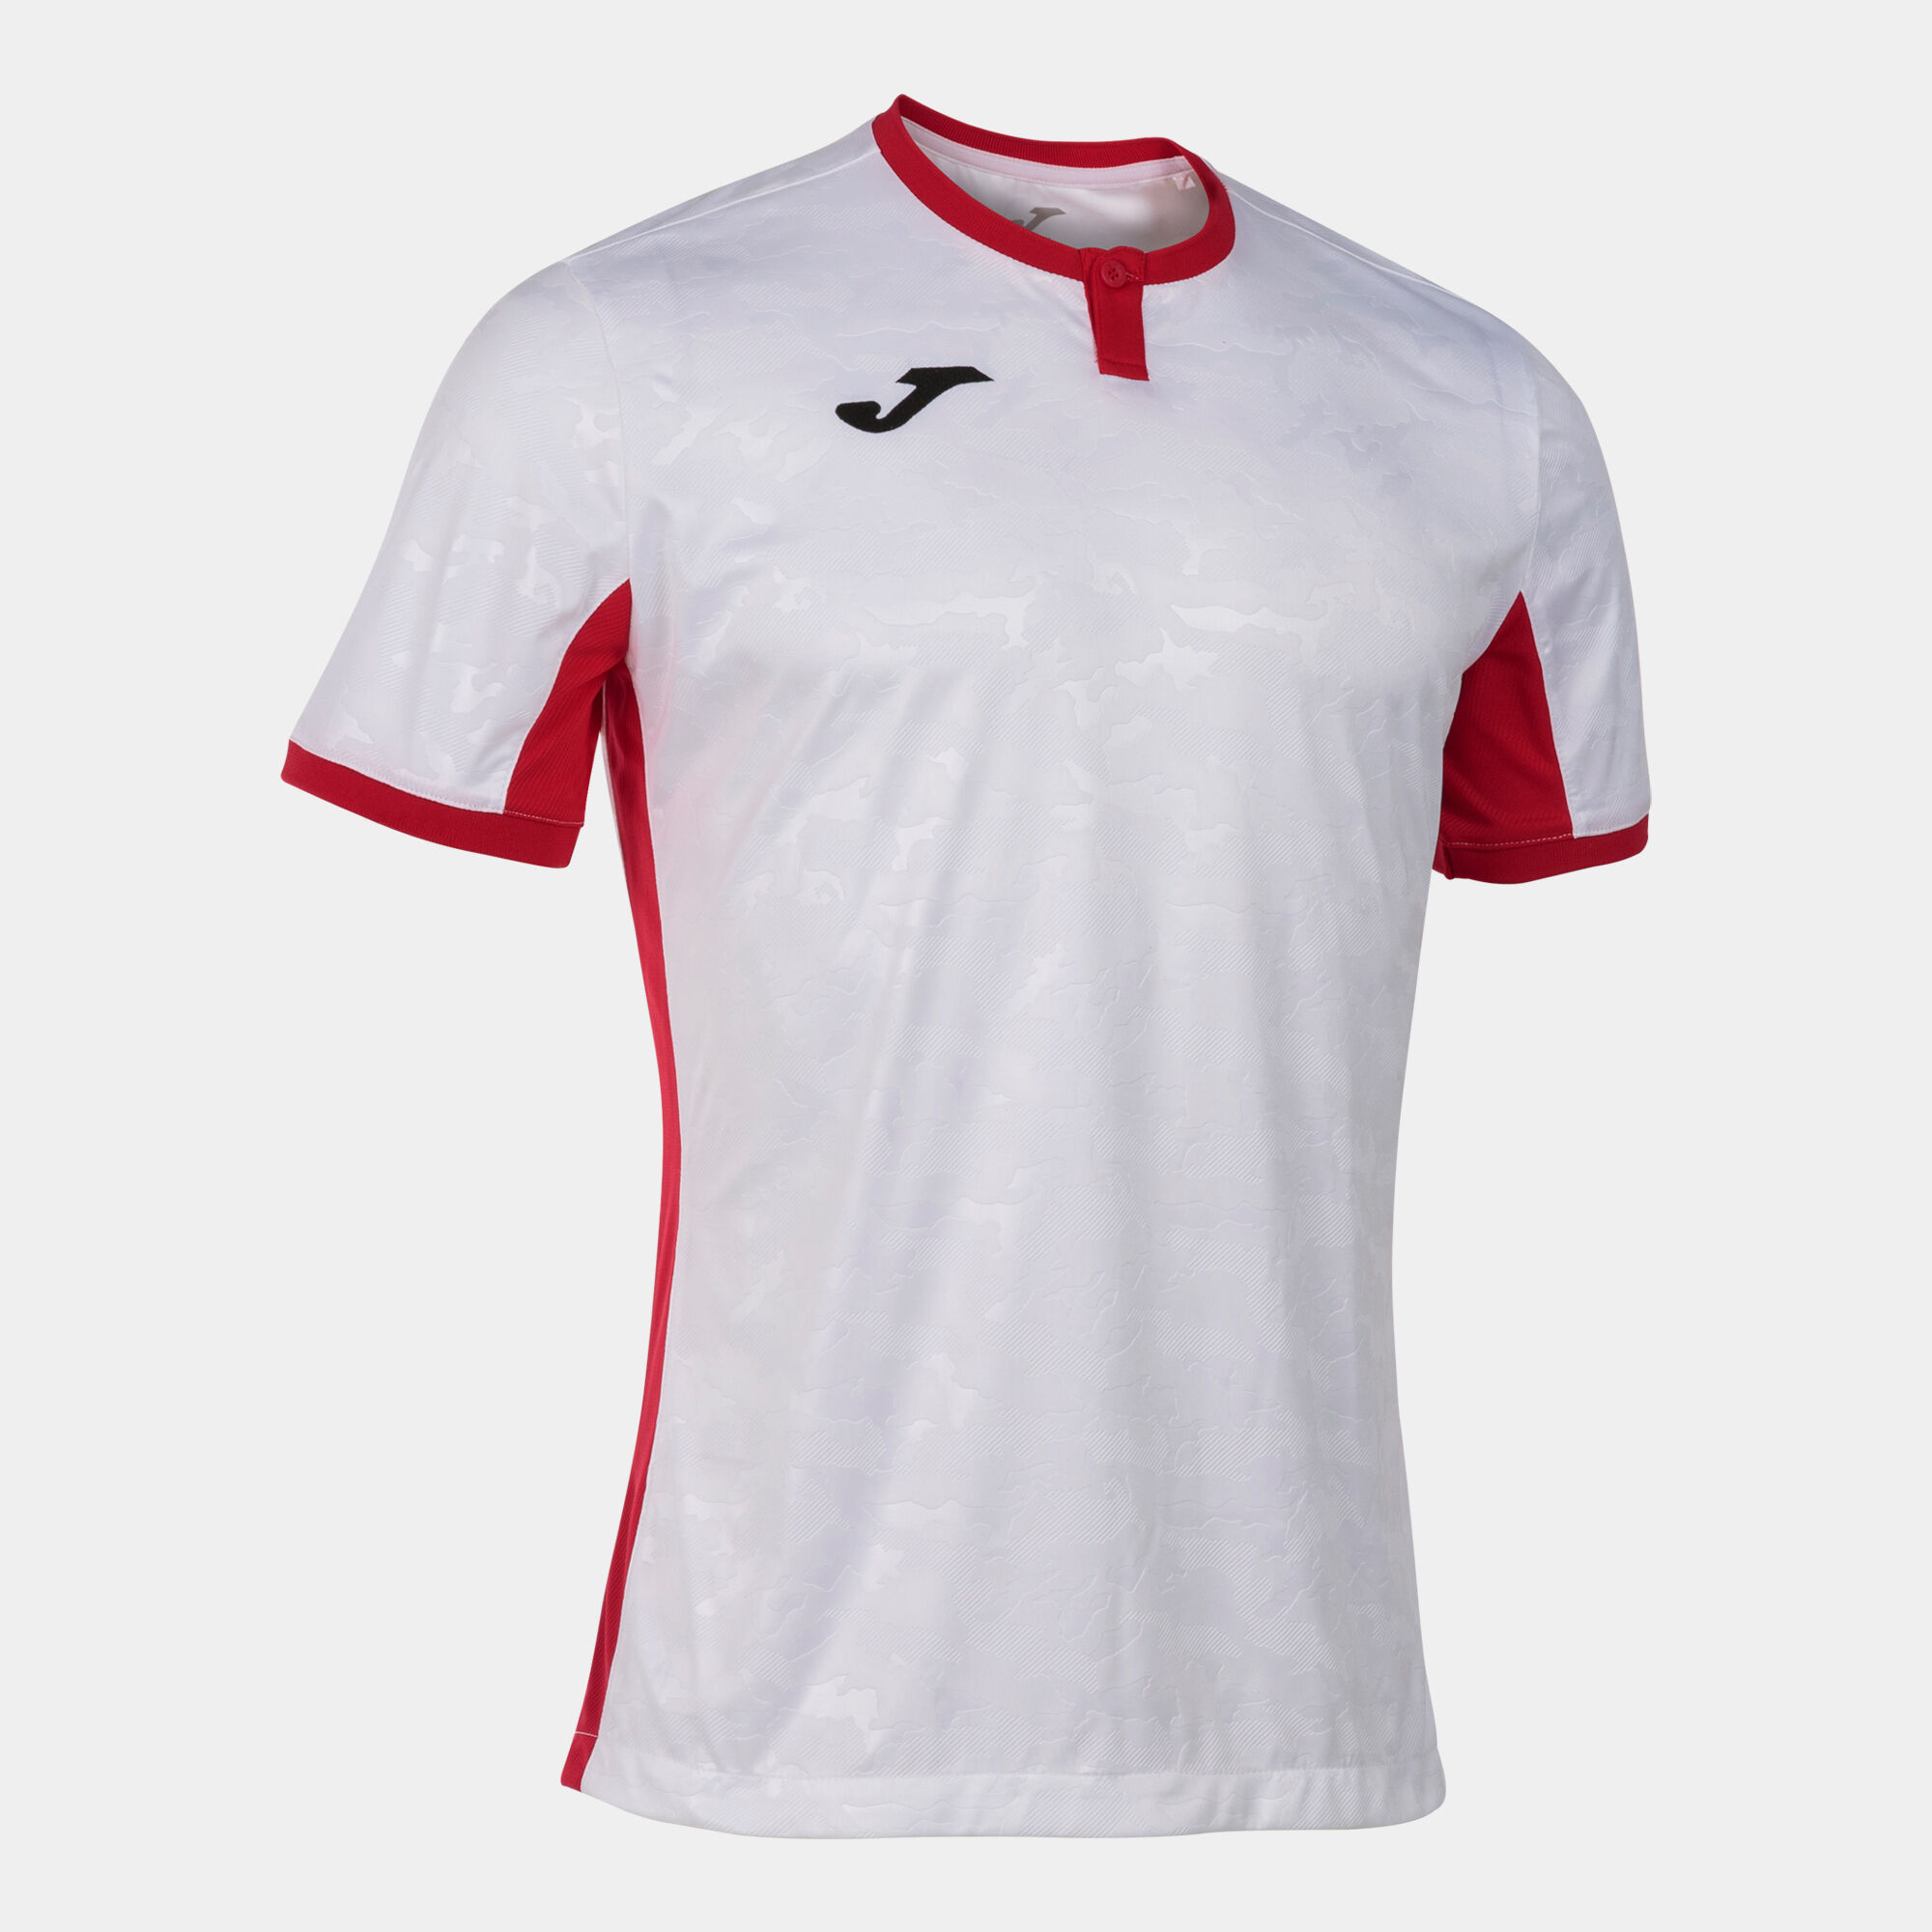 Maillot manches courtes homme Toletum II blanc rouge